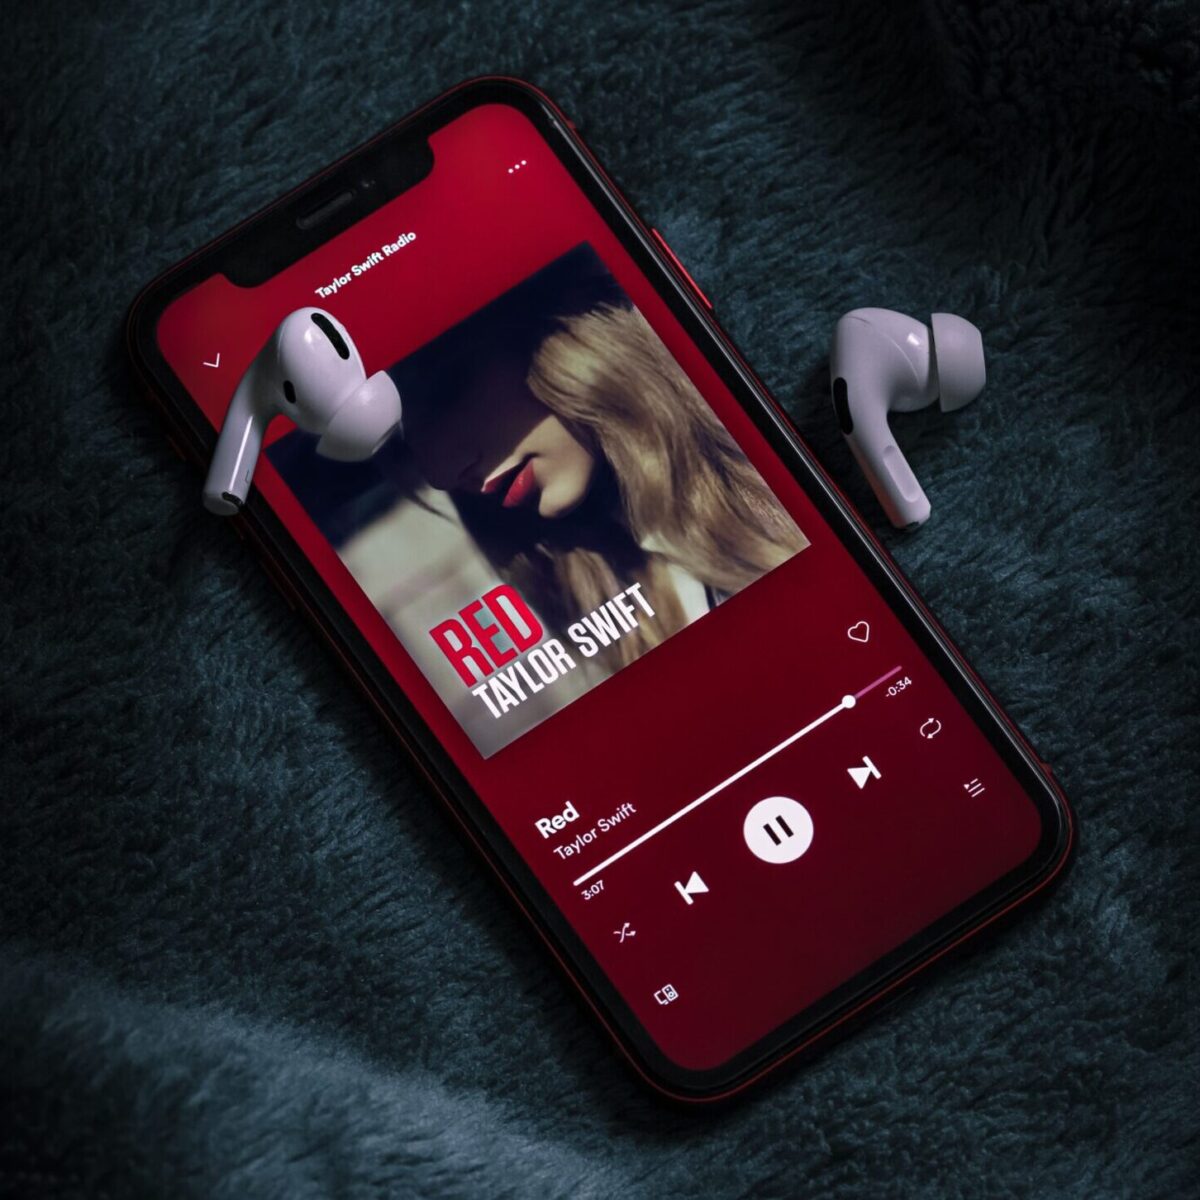 Touchscreen cellphone displaying the Spotify screen of Taylor Swift’s Red album